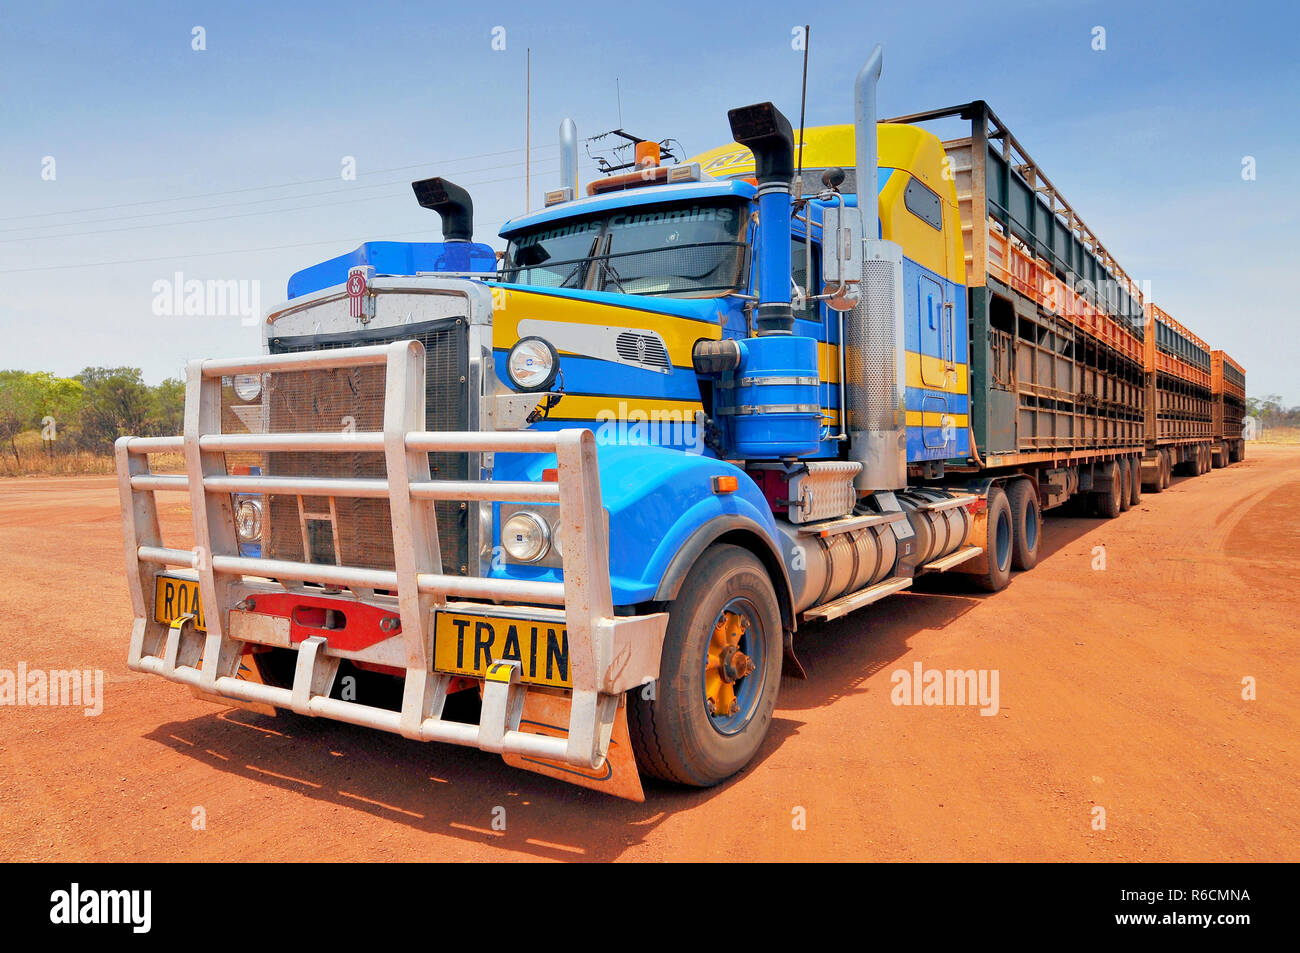 Australian Road Train On The Side Of A Road, Outback Northern Territory, Australia Stock Photo